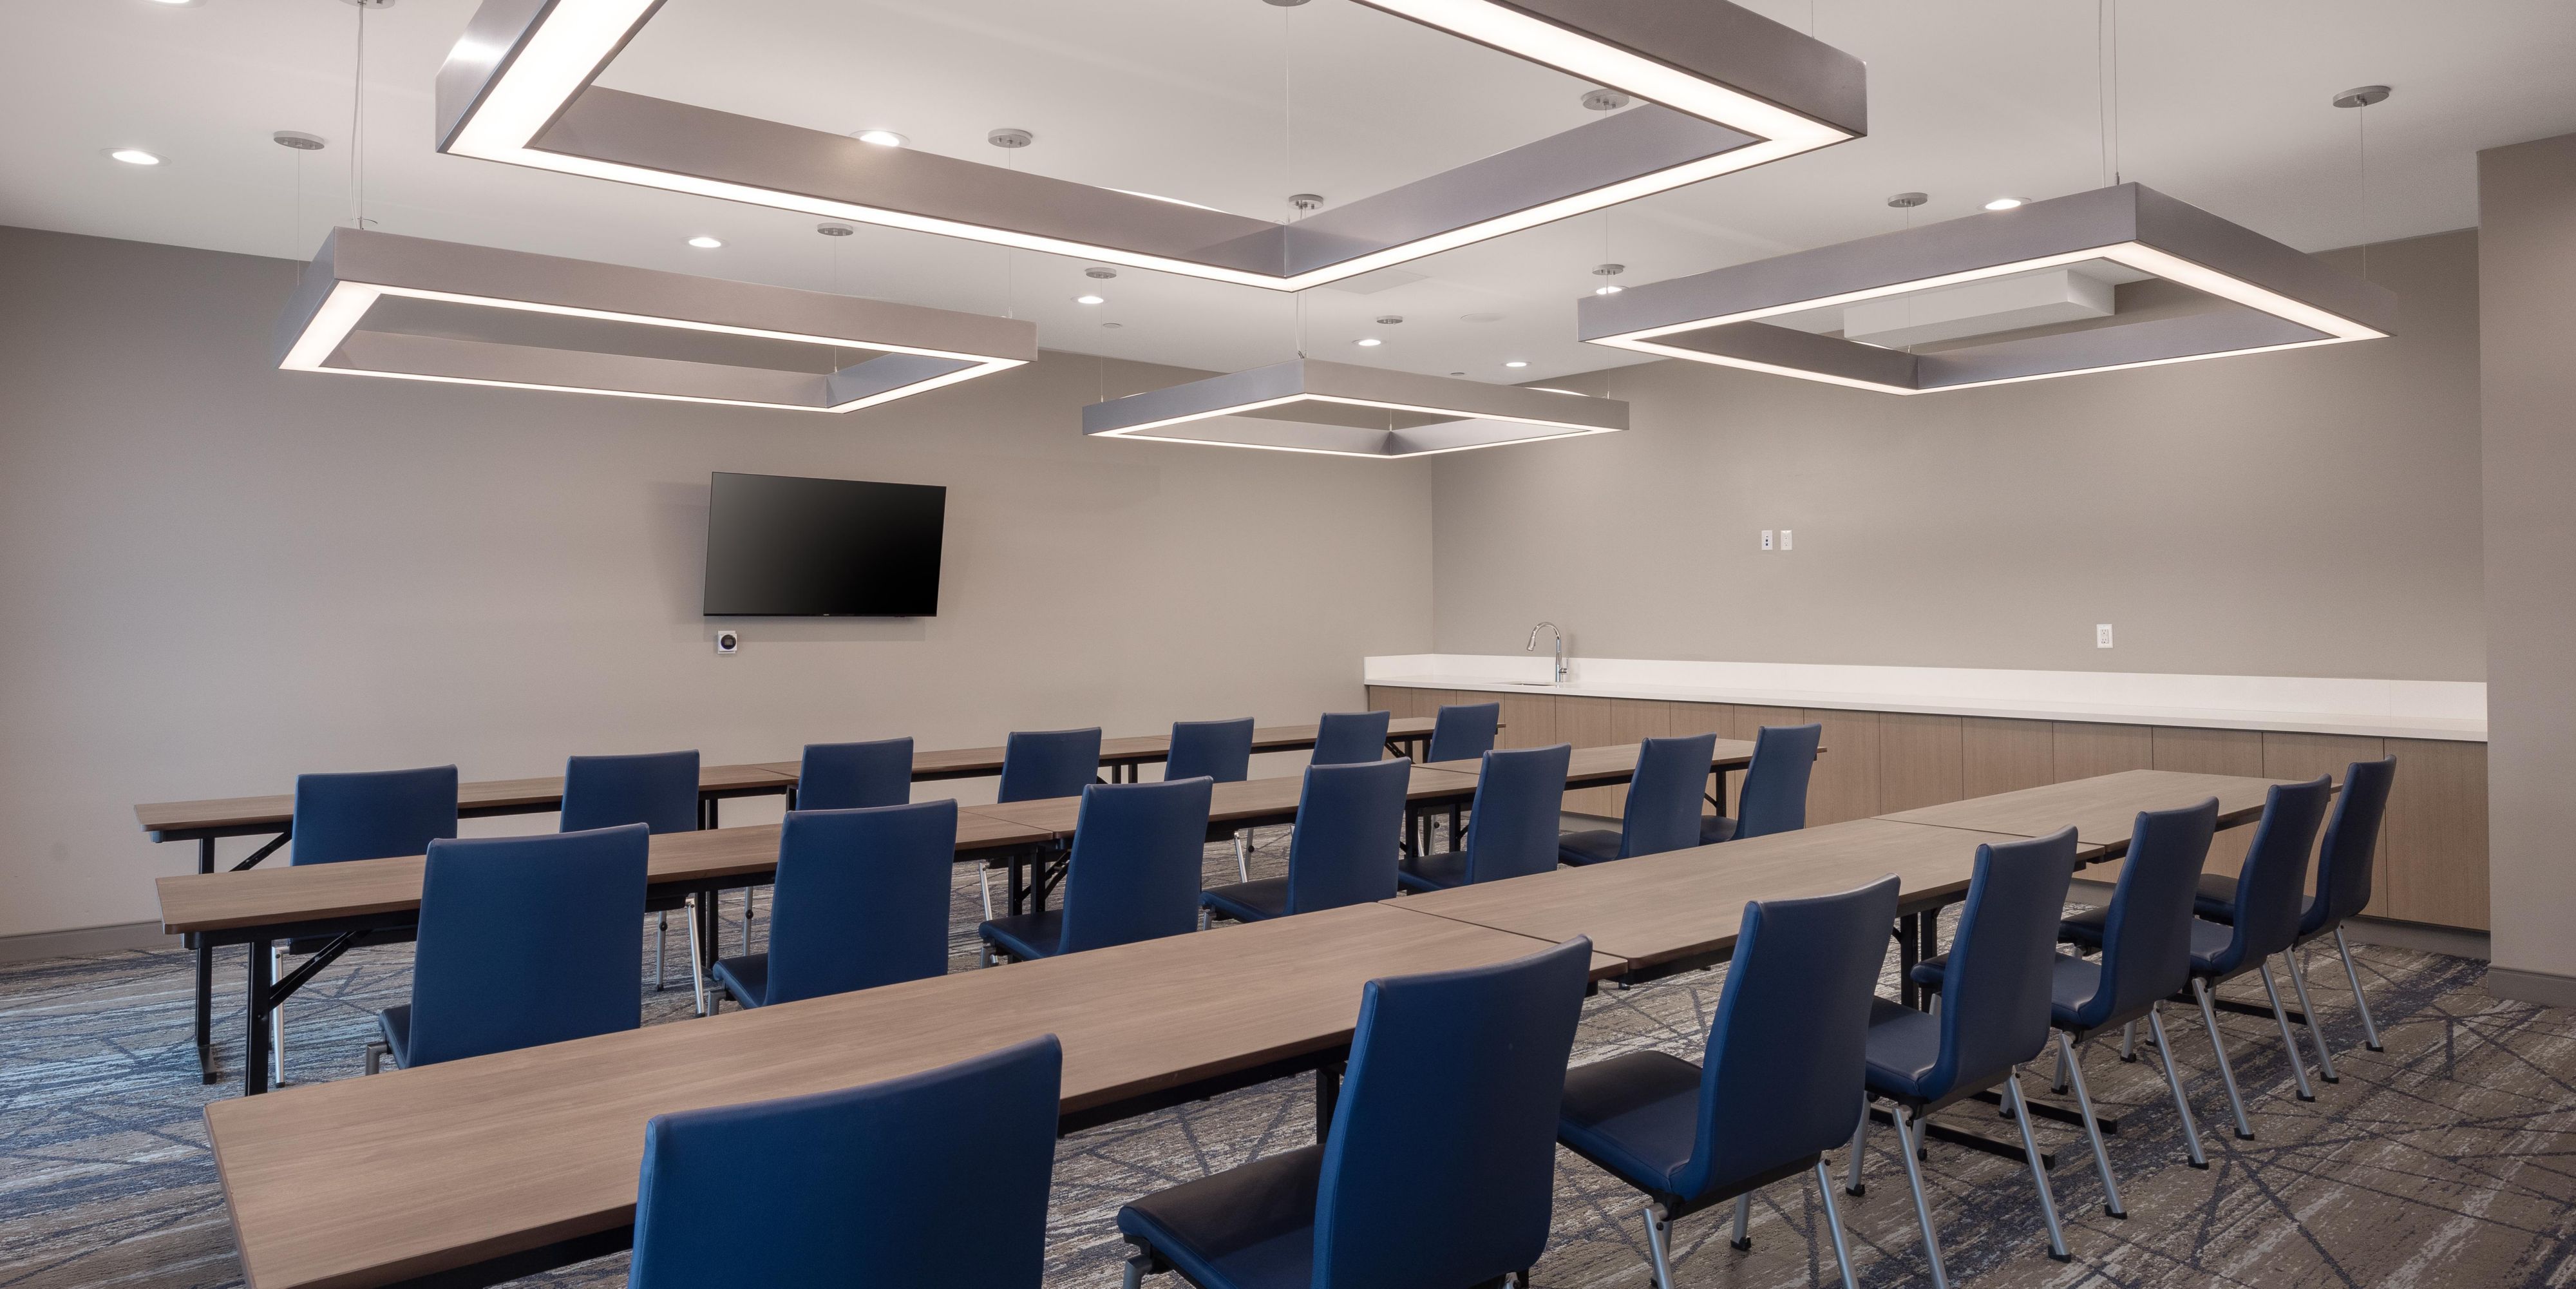 Our main meeting room is ready to use, equipped with a TV that is HMDI-ready. This space can be transformed into whatever will fit your needs; whether it be classroom style for training or even getting rid of the tables completely for a more open collaborative set-up.  